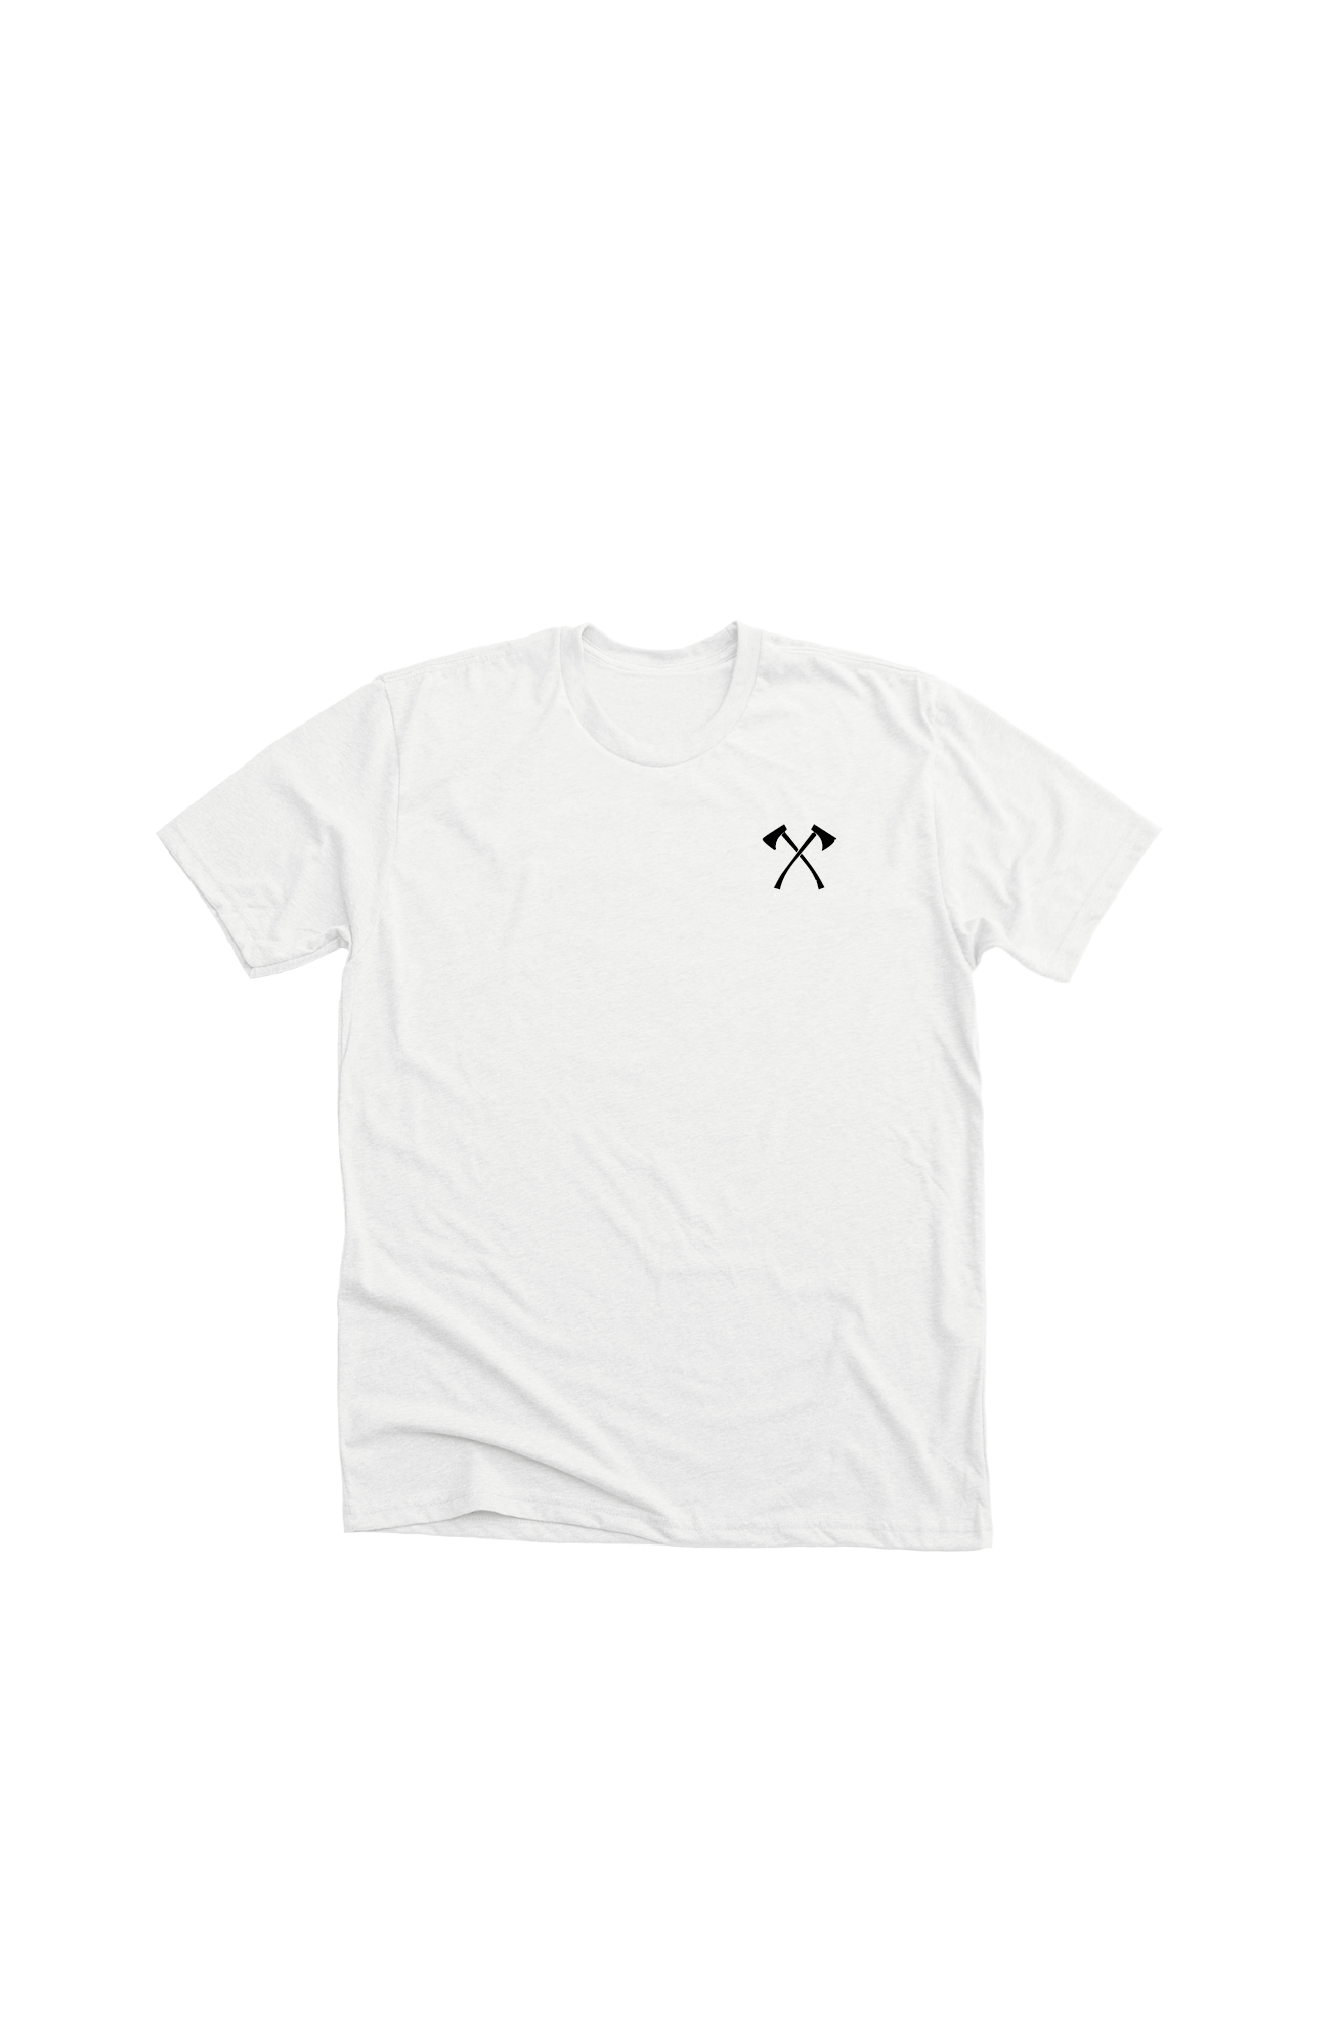 Front of Axe Mentality white t-shirt